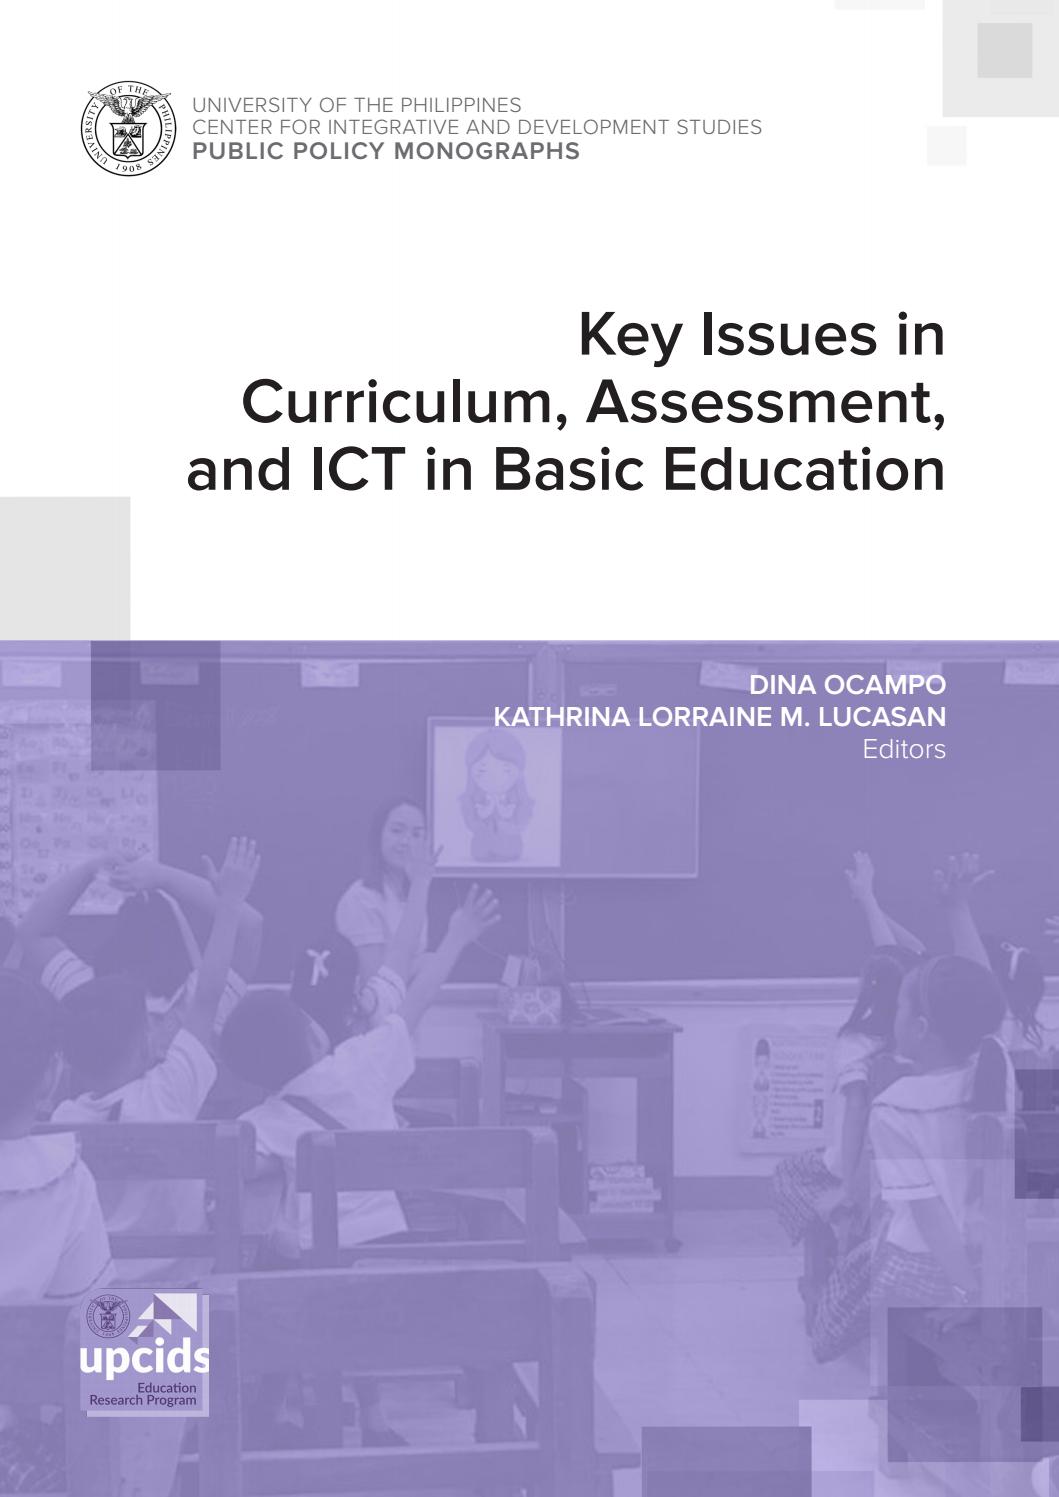 Key issues in curriculum, assessment, and ICT in basic education